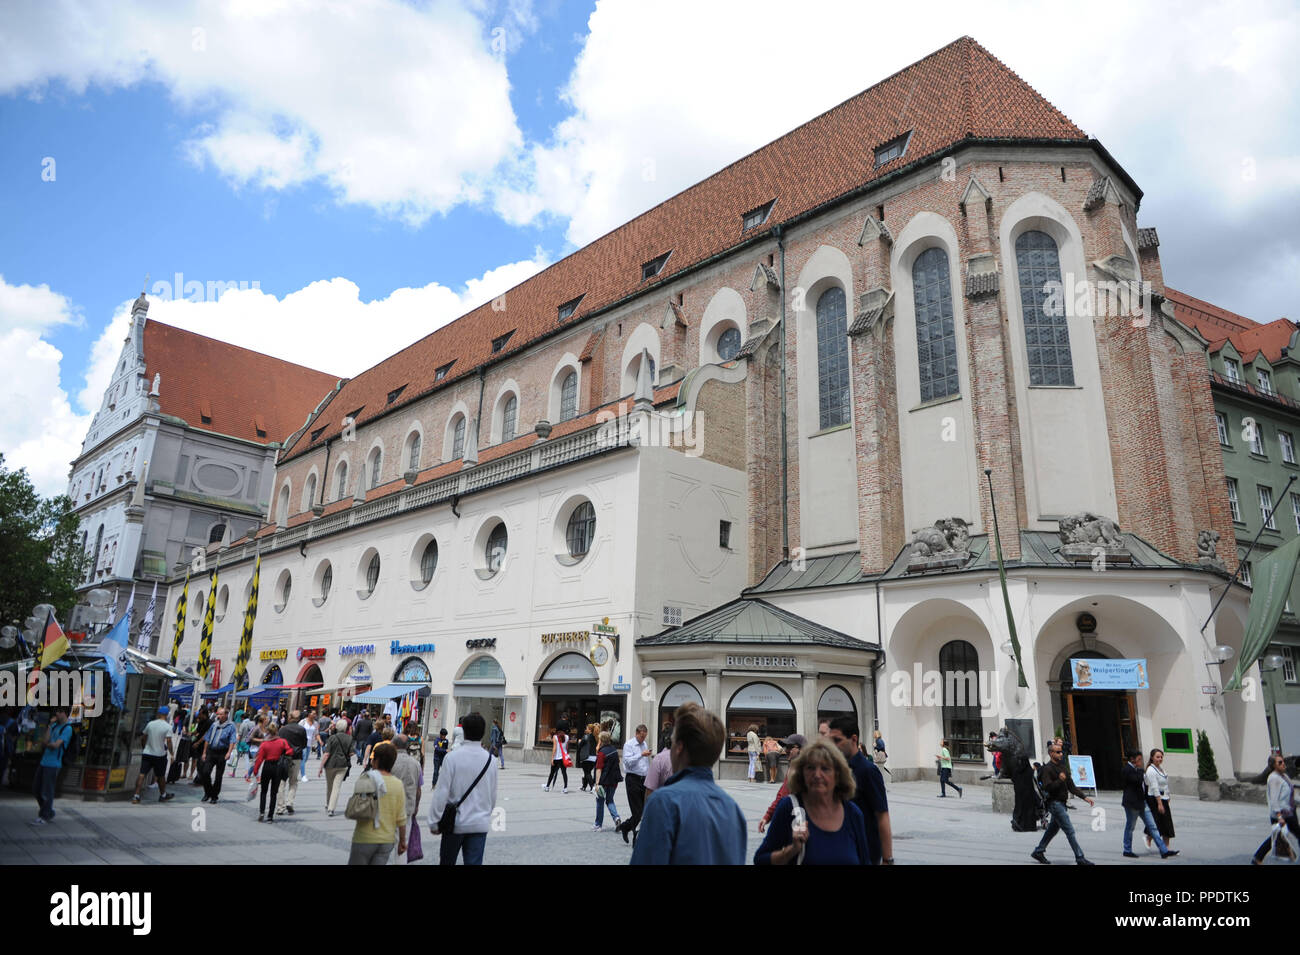 The Jagd- und Fischereimuseum (Hunting and Fishing Museum) in the former Augustinerkirche in the Neuhauser Strasse. Stock Photo